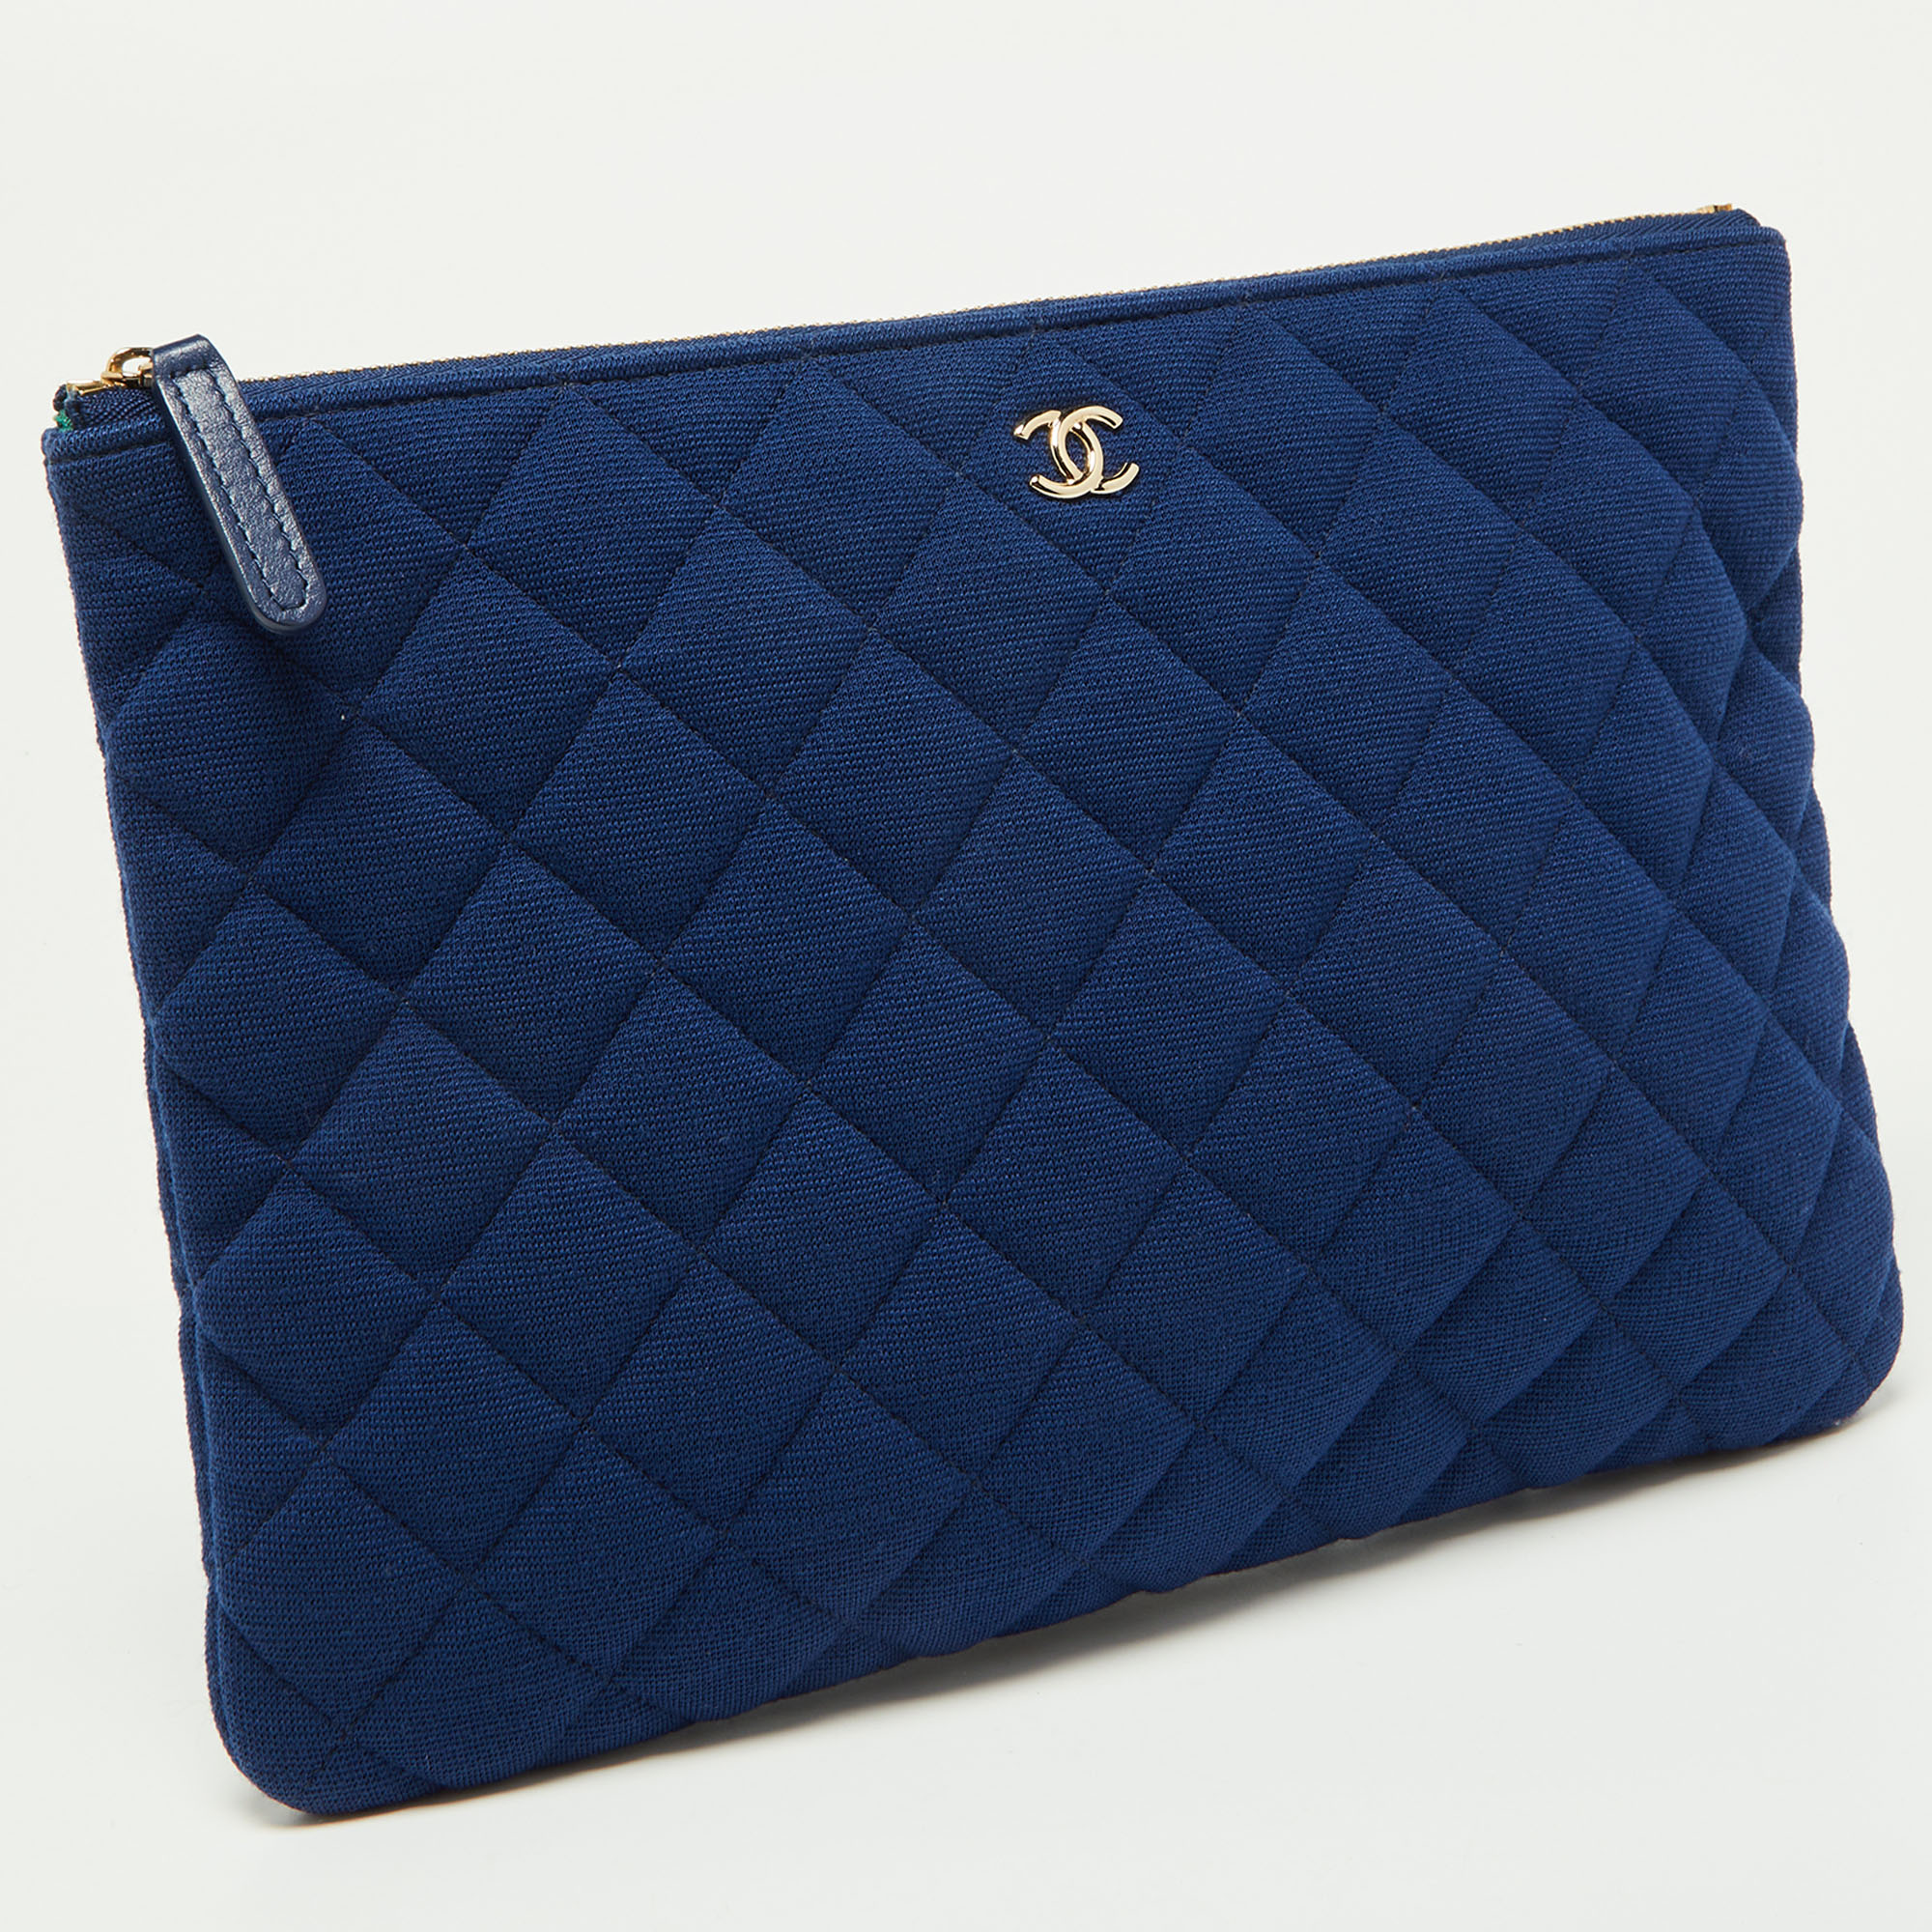 Chanel Blue Quilted Jersey Medium O Case Clutch